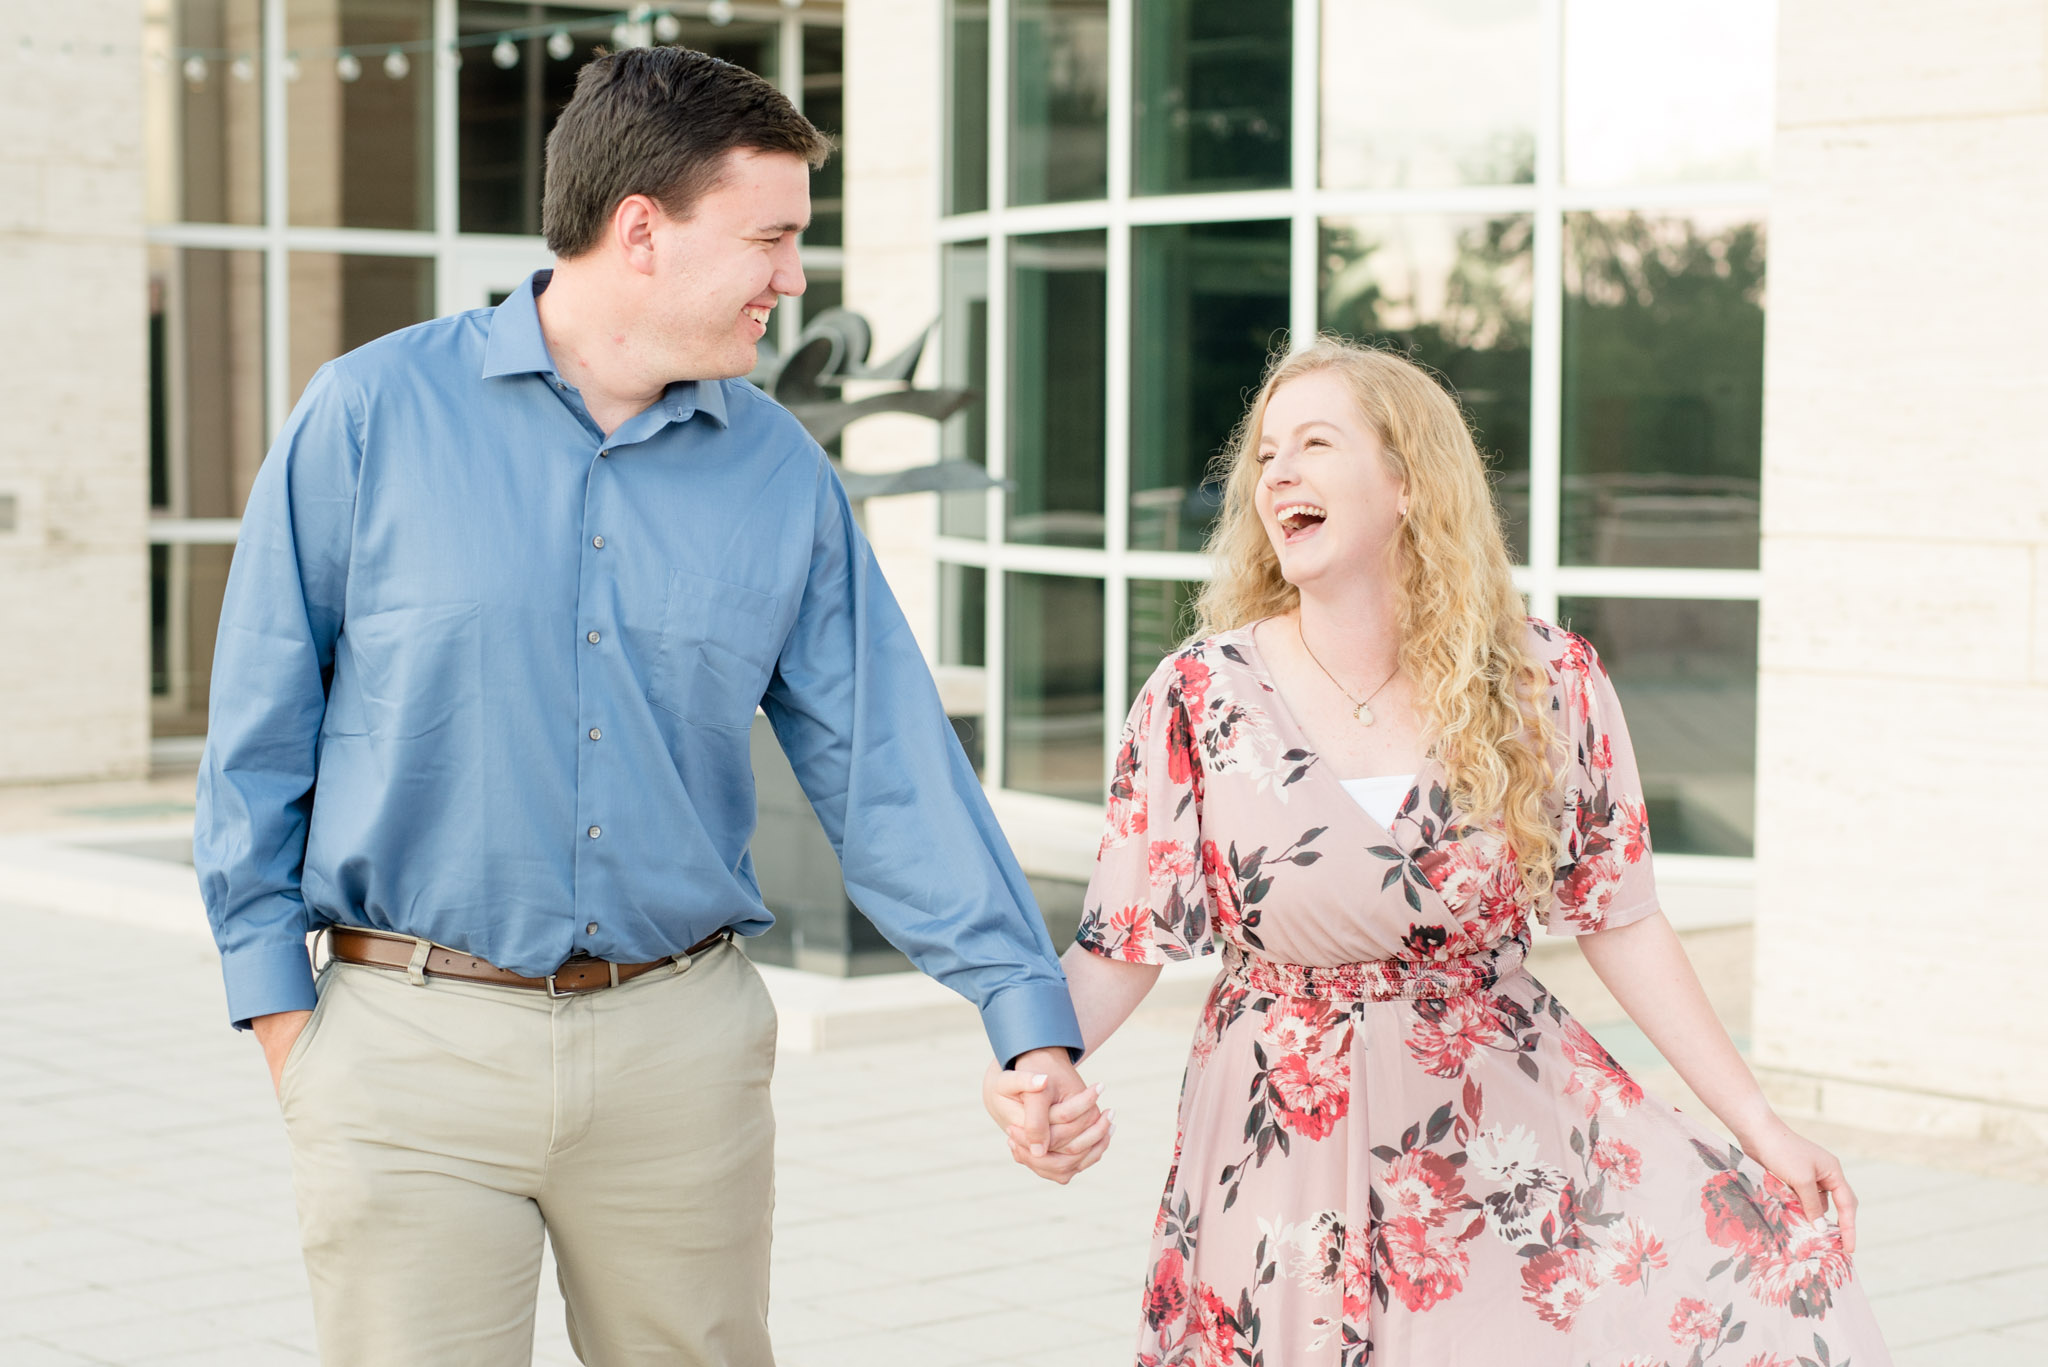 Engaged couple laughs together while holding hands.